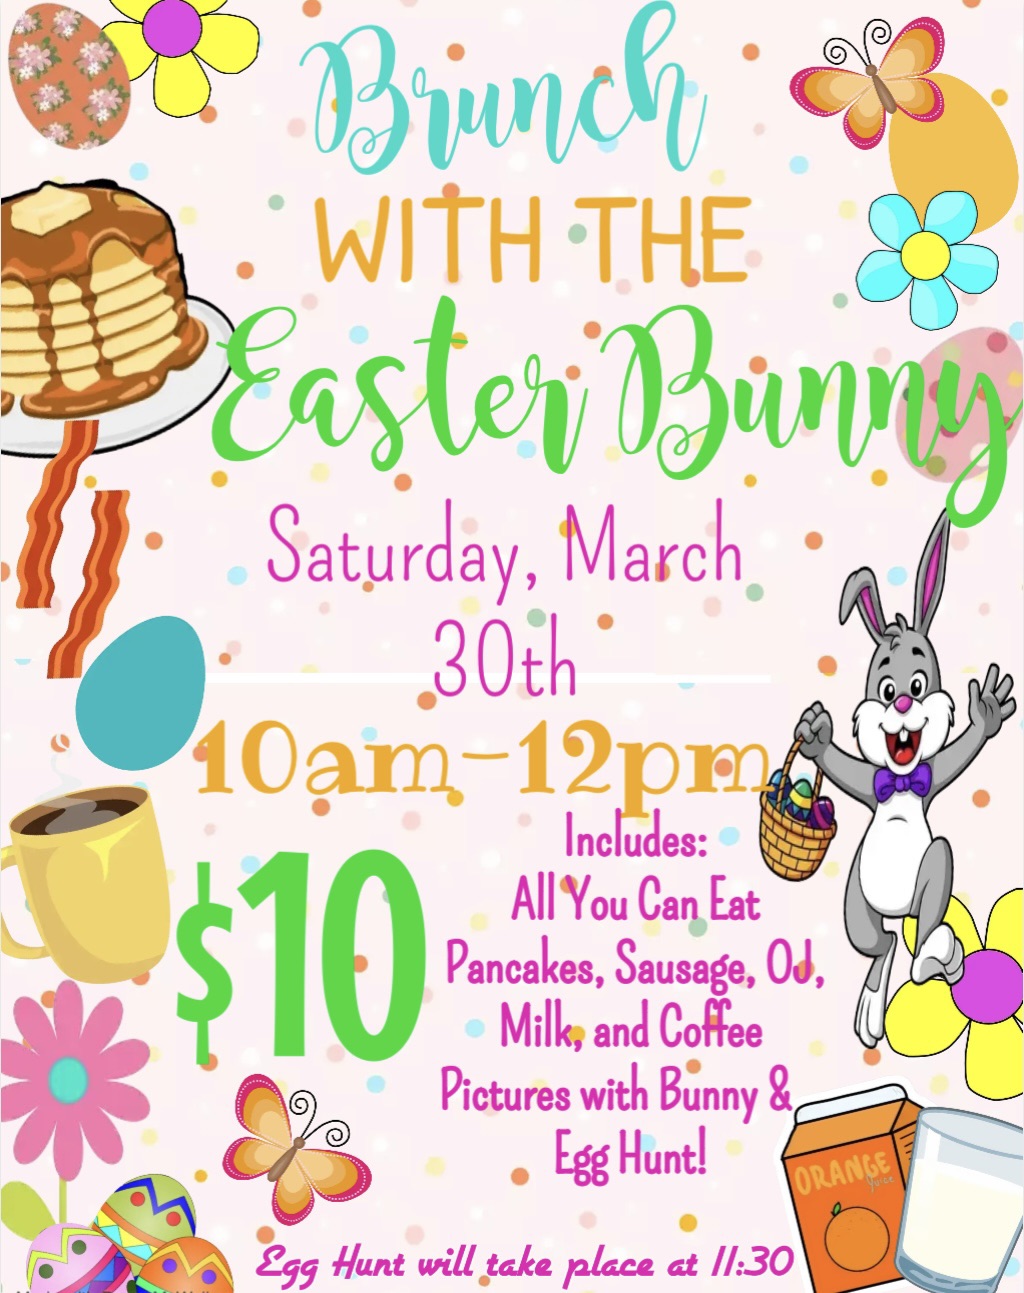 brunch-with-the-easter-bunny